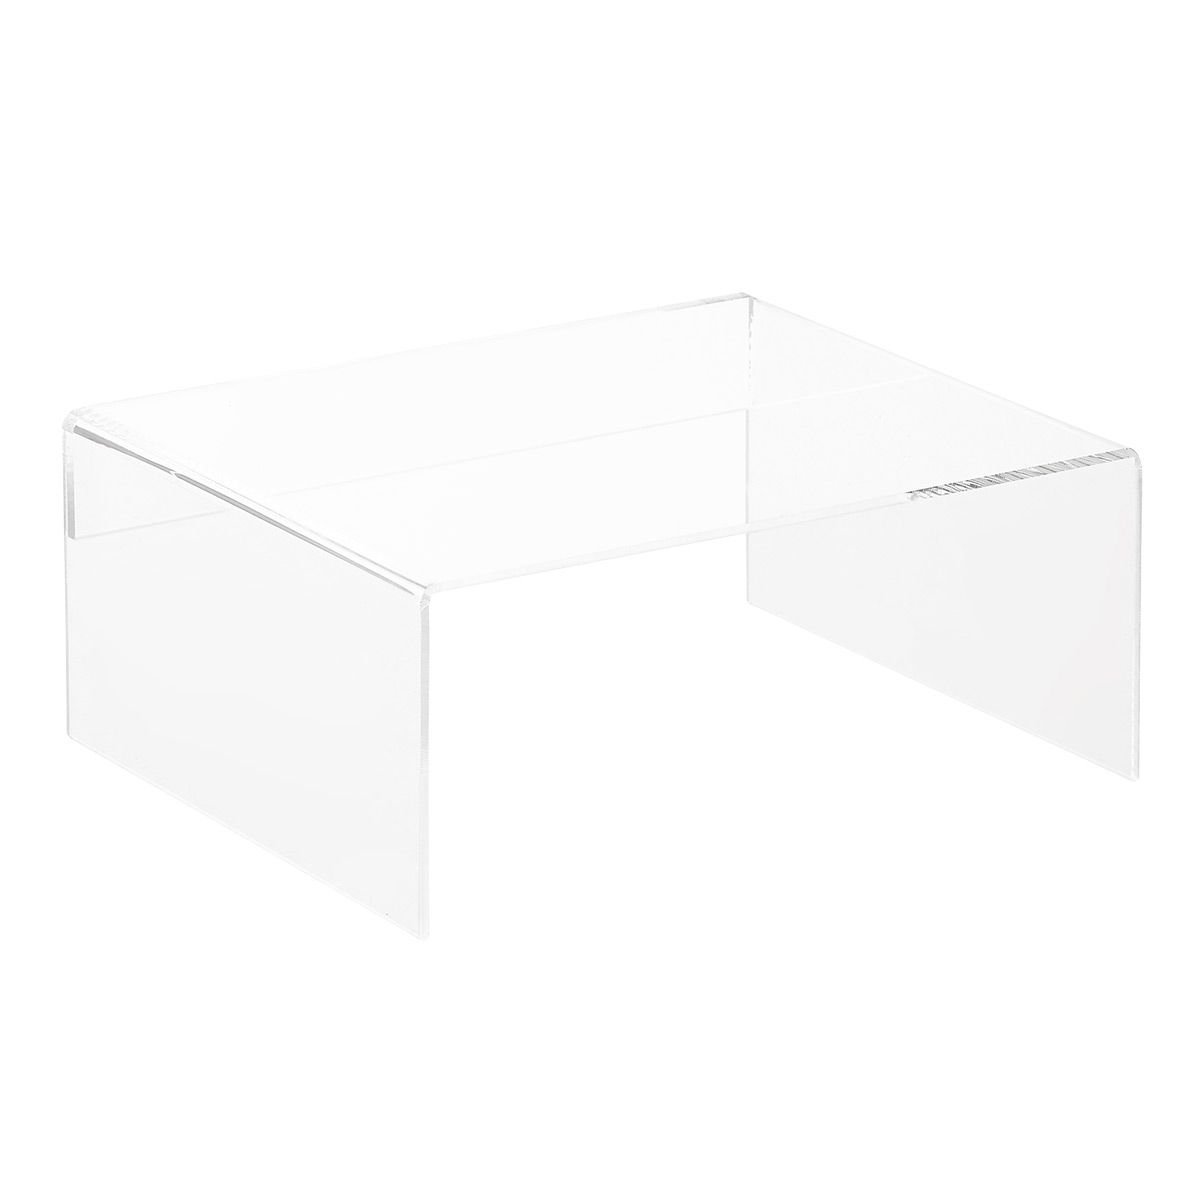 Acrylic Organizer Shelves | The Container Store